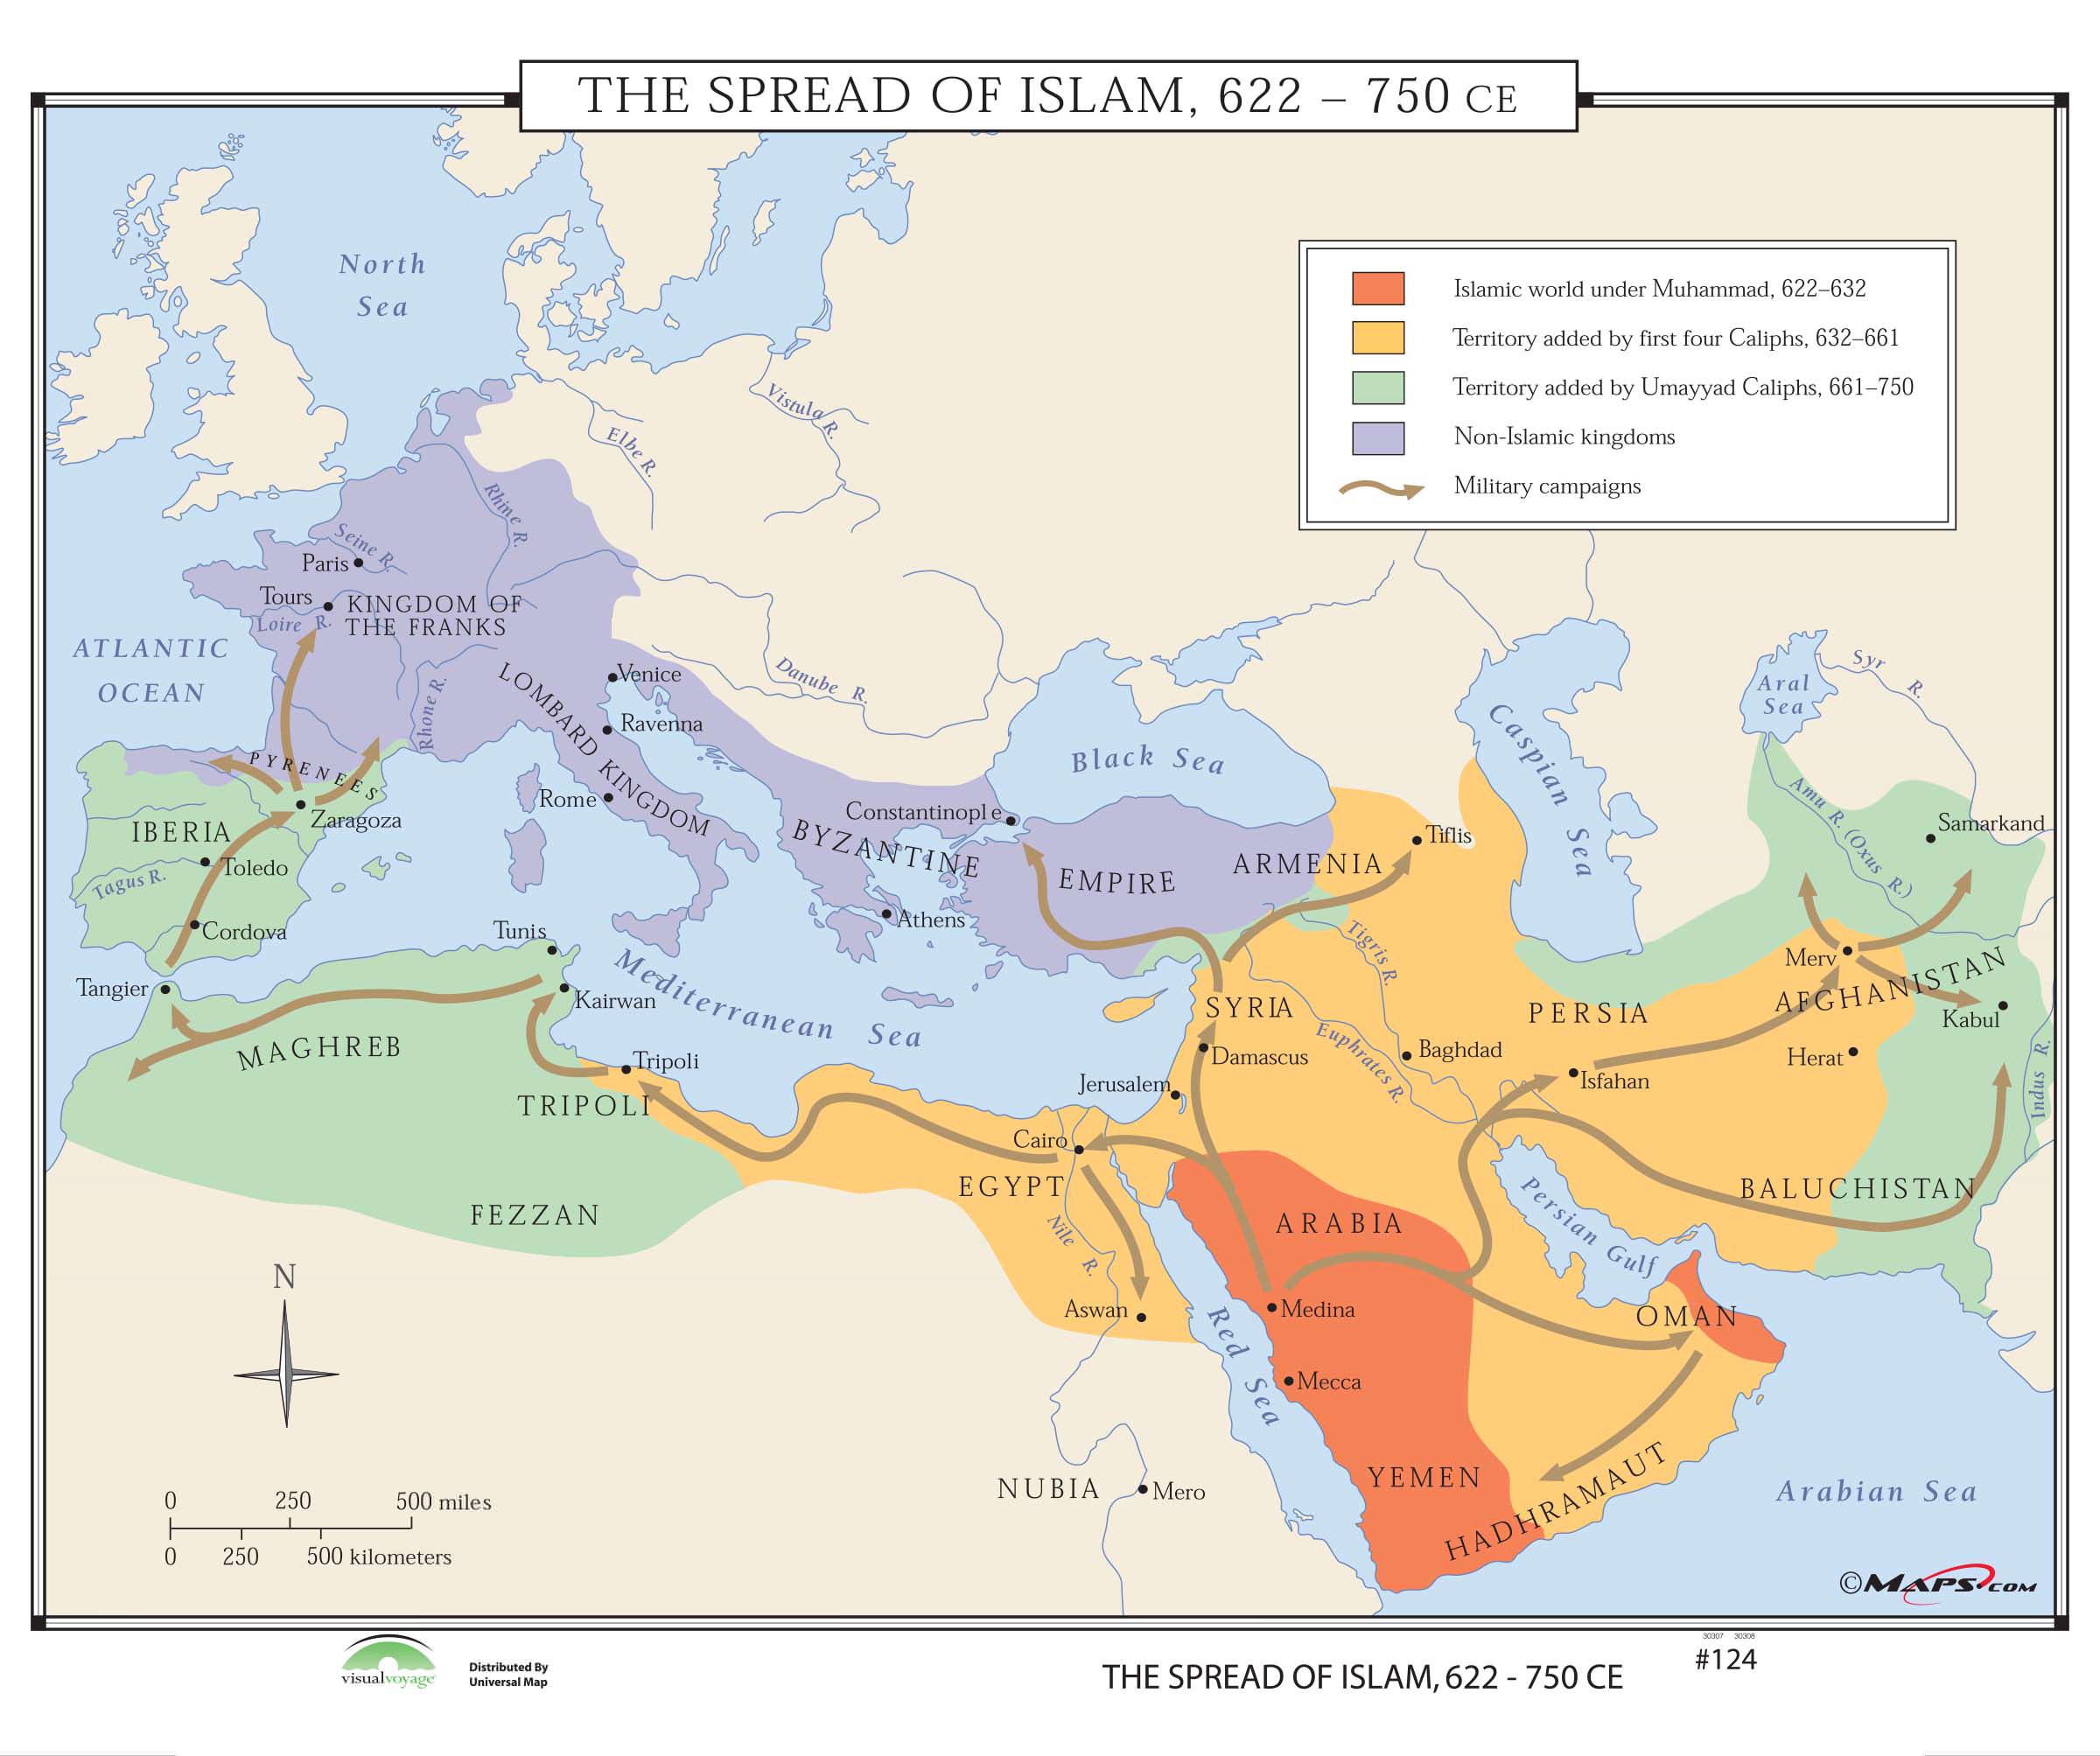 a map depicting the spread of Islam across Arabia, then into Egypt and Persia, then onto the Indian Subcontinent